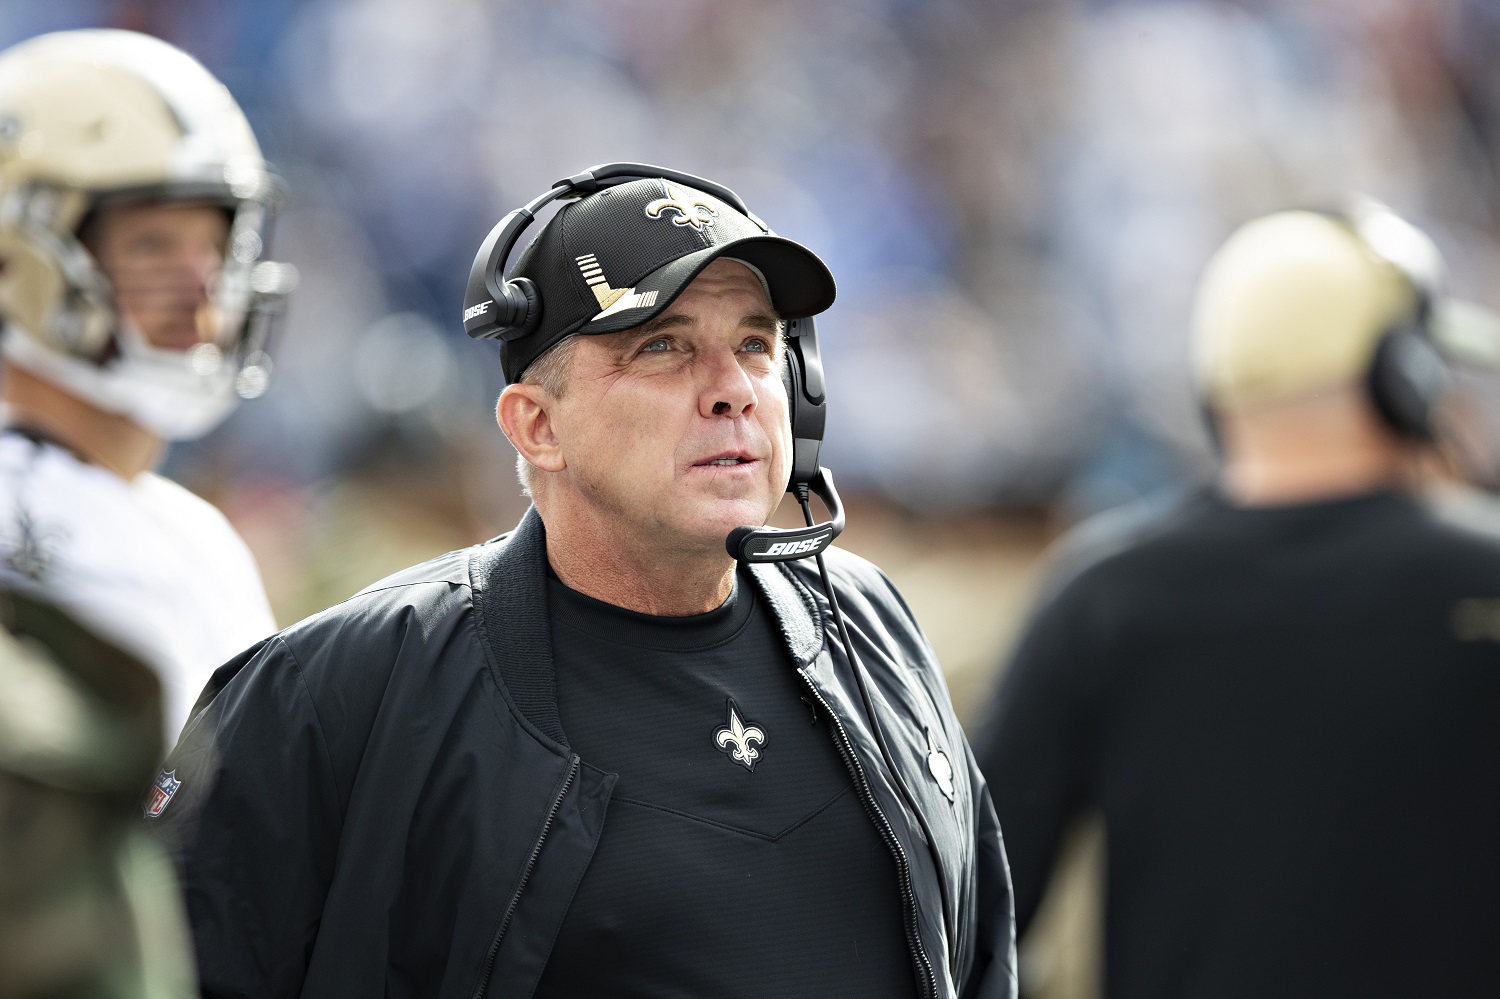 Coach Sean Payton of the New Orleans Saints on the sidelines during a game against the Tennessee Titans on Nov. 14, 2021, in Nashville, Tennessee. | Wesley Hitt/Getty Images